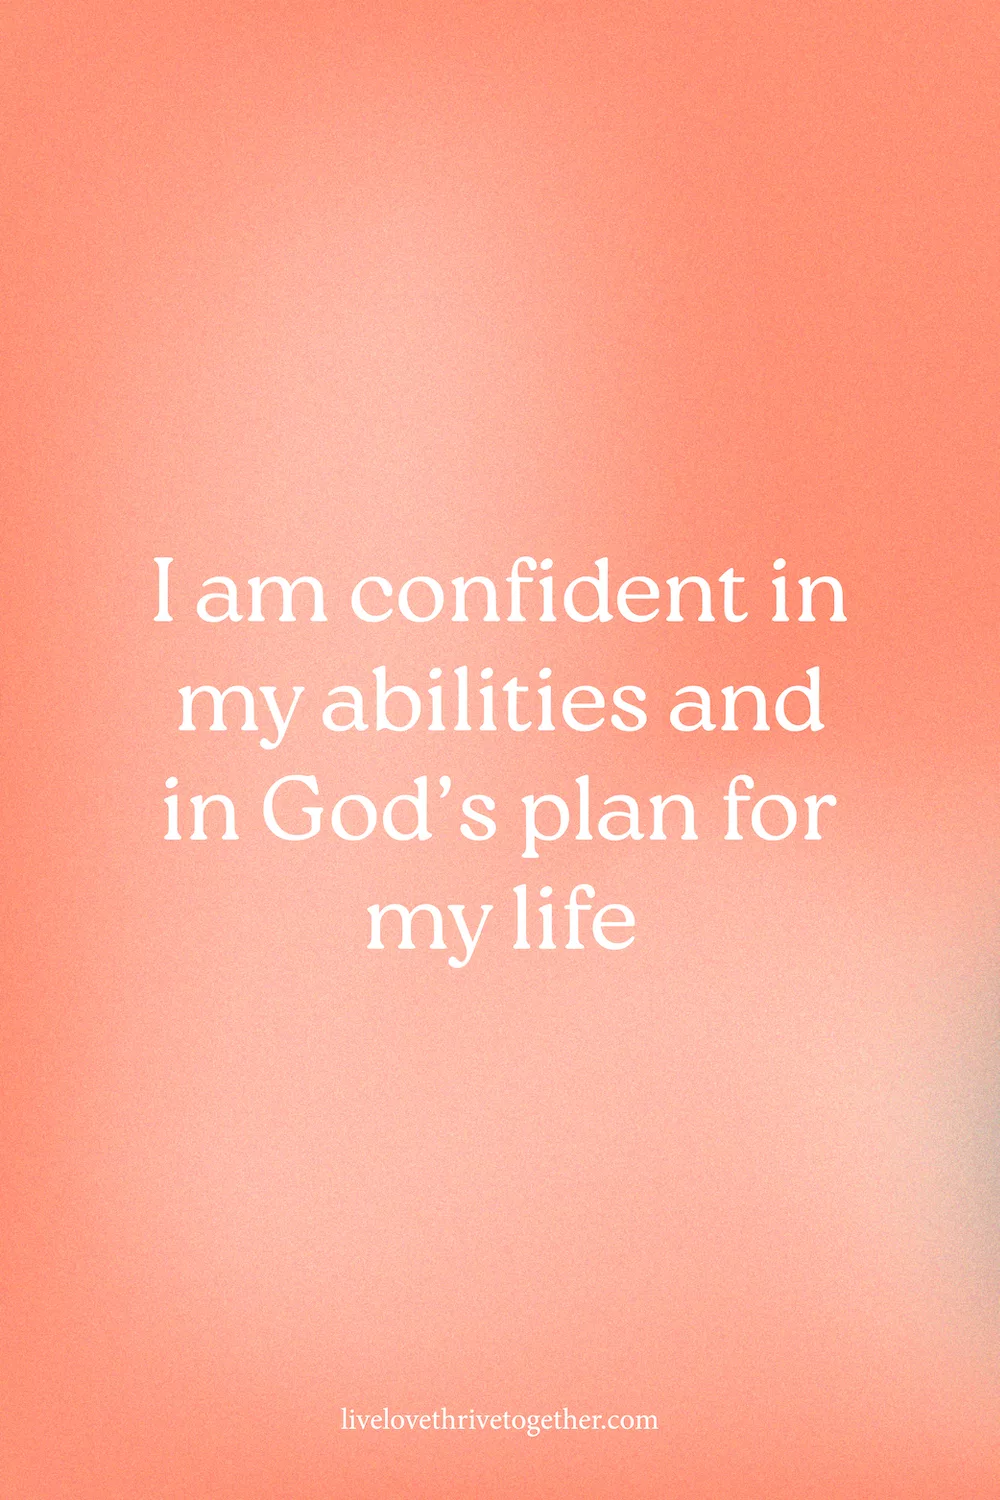 I am confident in my abilities and in God's plan for my life | Monday Affirmations